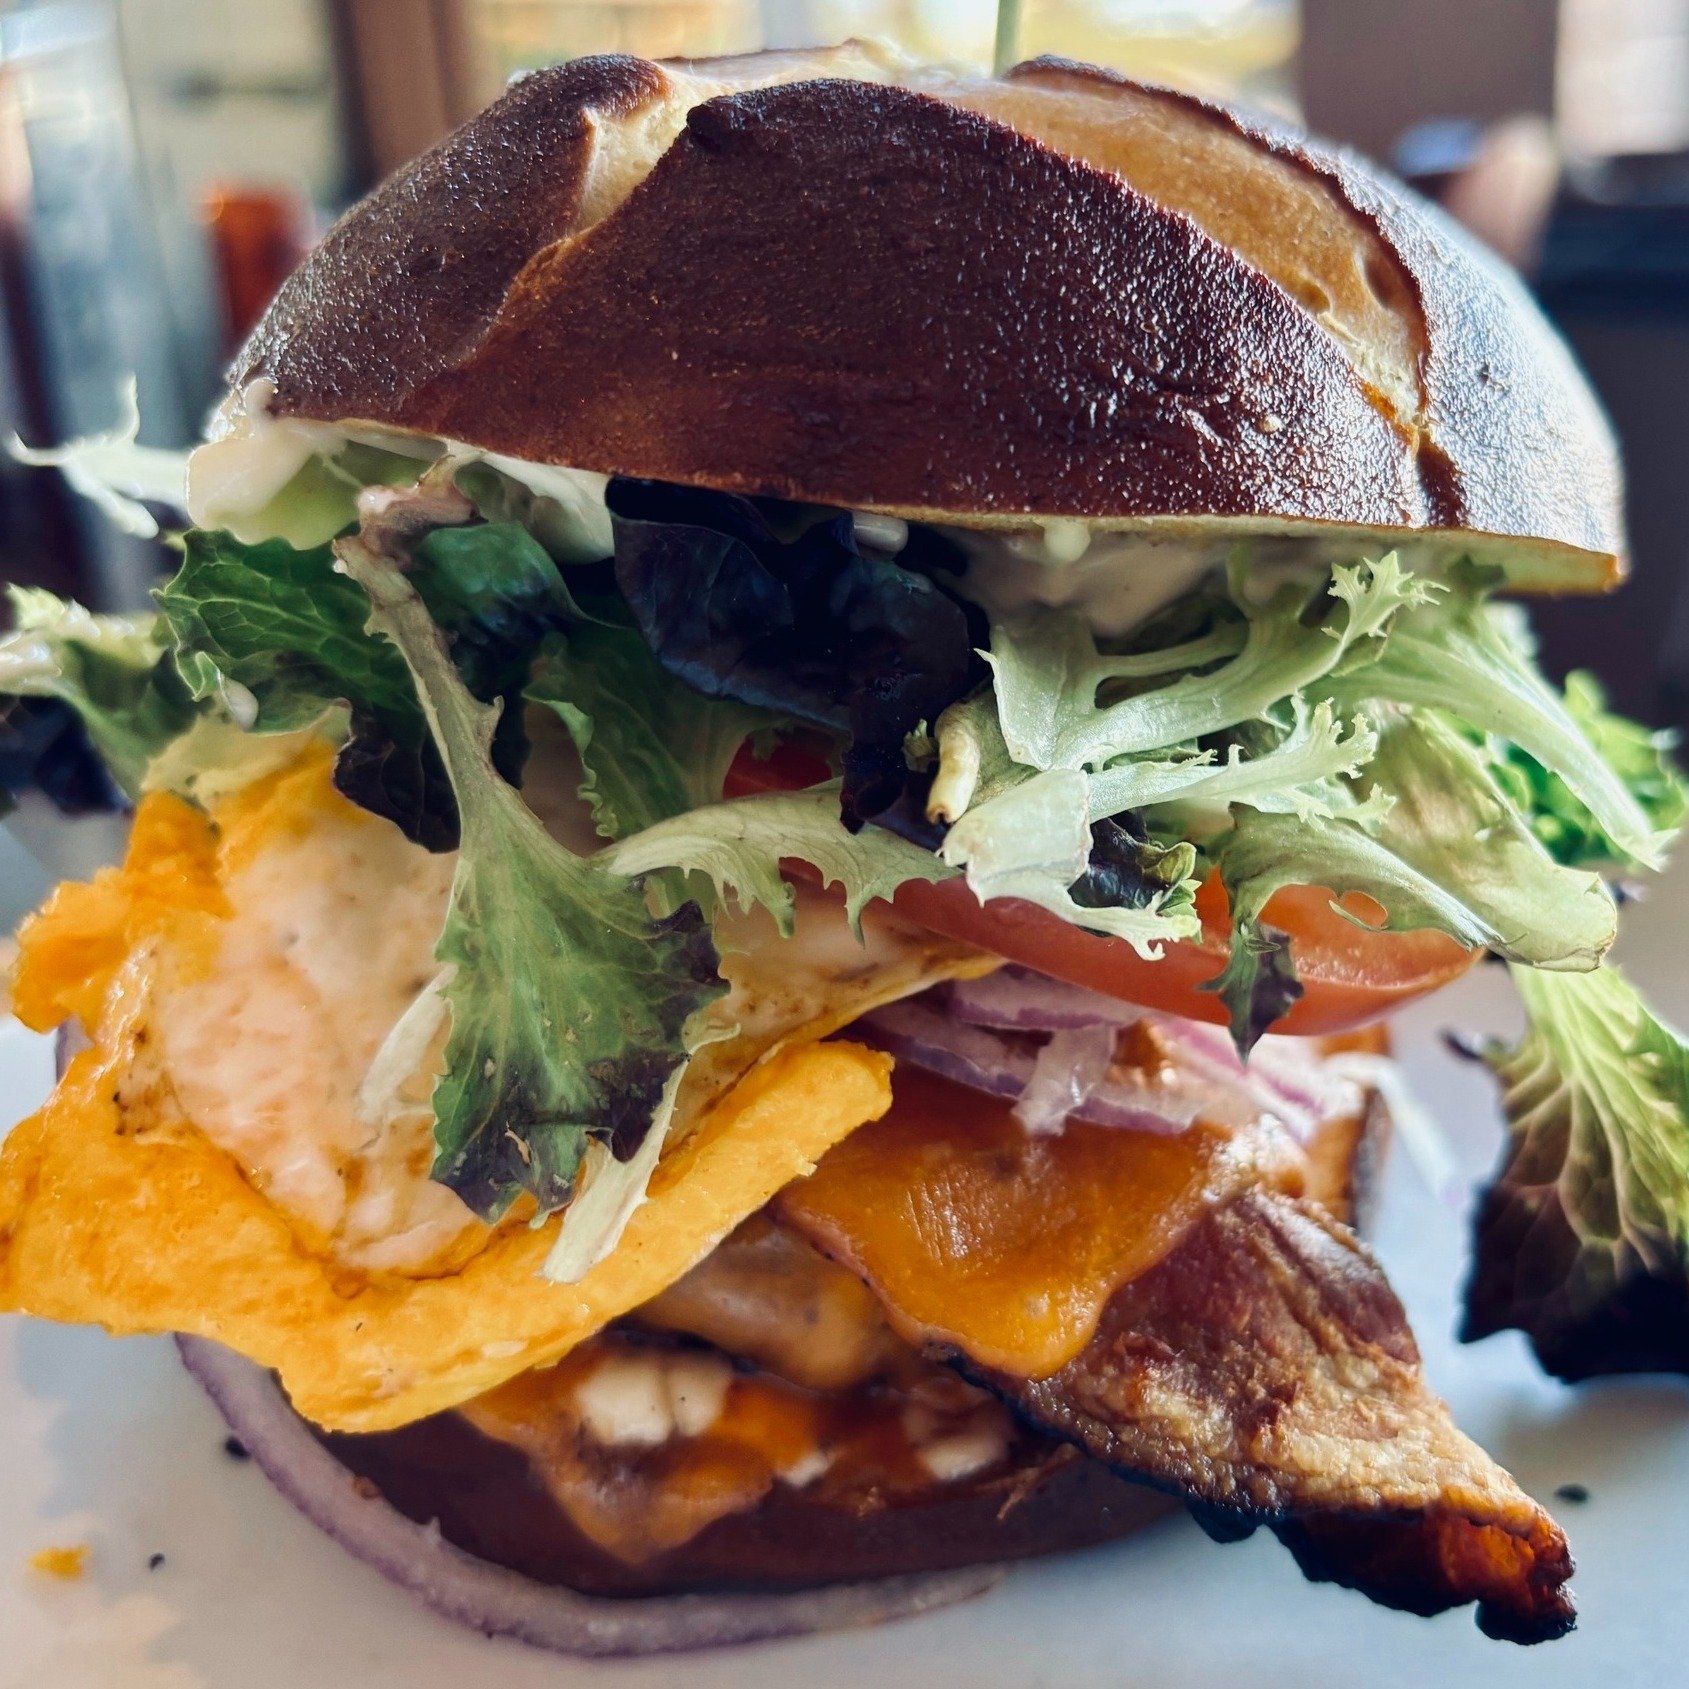 Have you tried the NEW TC's House Burger? It comes with your choice of FRESH homemade soup or fries and is served on a pretzel bun with lettuce, tomato, cheese, bacon + trailer sauce. YUM! 🤤
.
TC's Pub is OPEN for lunch and dinner weekdays from noon